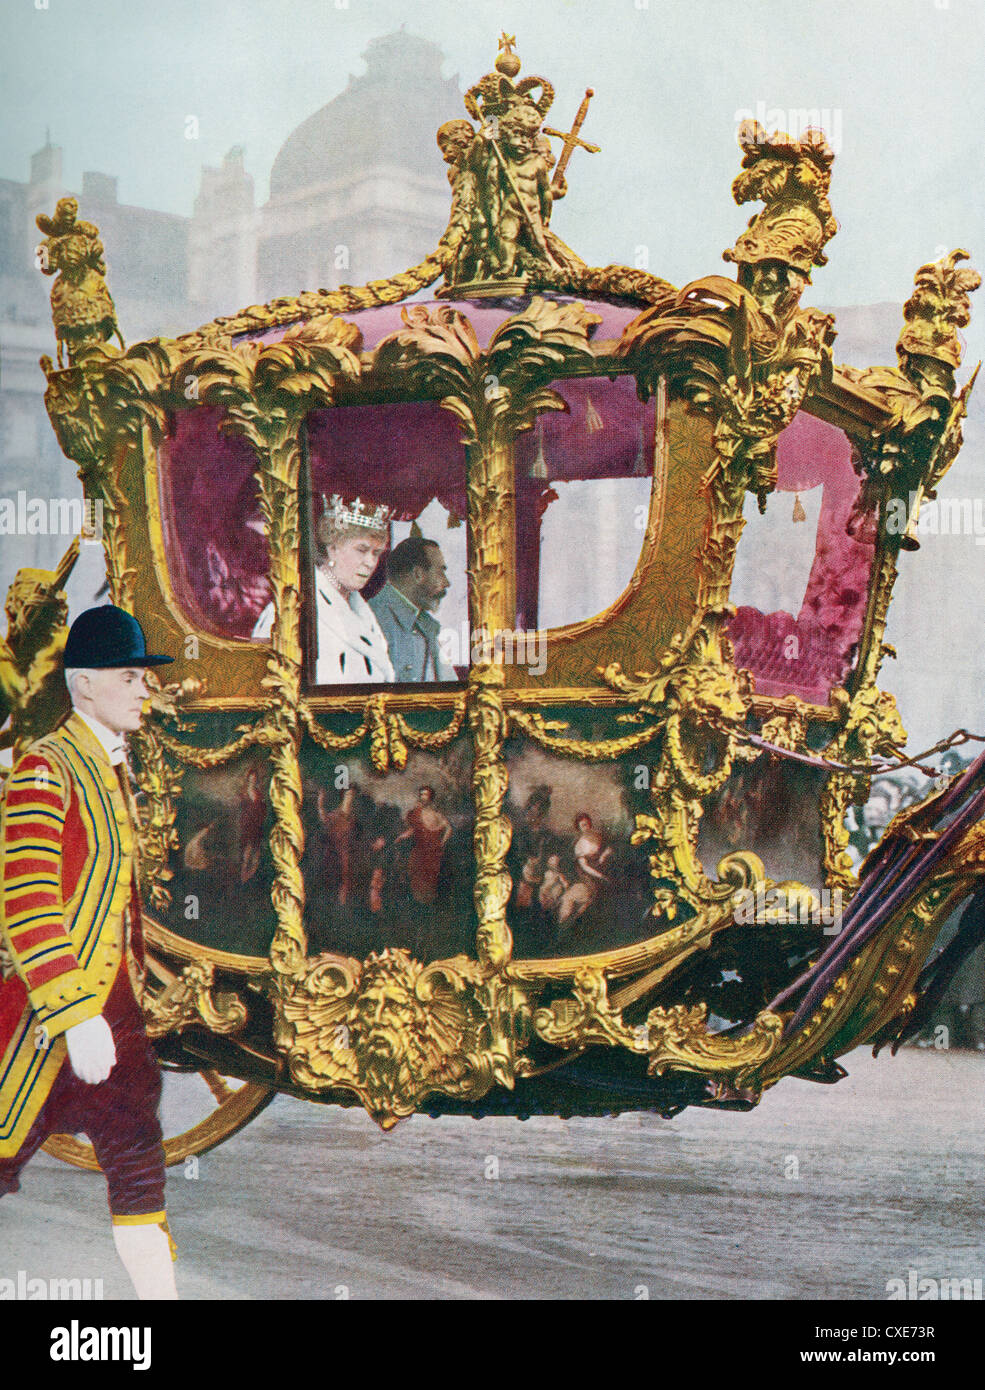 Their Majesties King George V and Queen Mary in the historic State Coach. Stock Photo